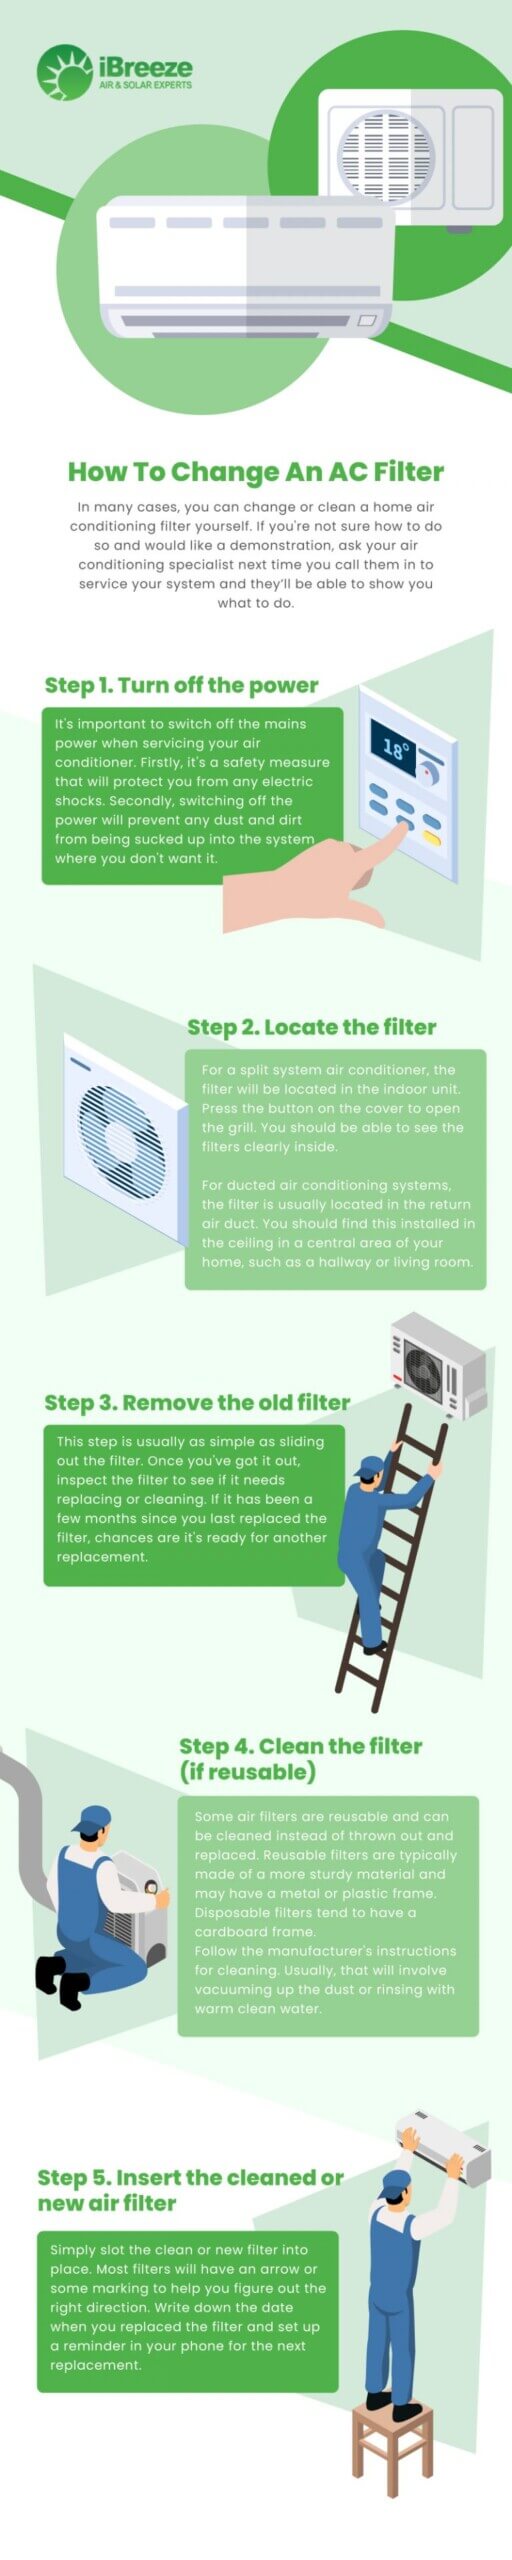 How to Change Your AC Filter at Home infographic